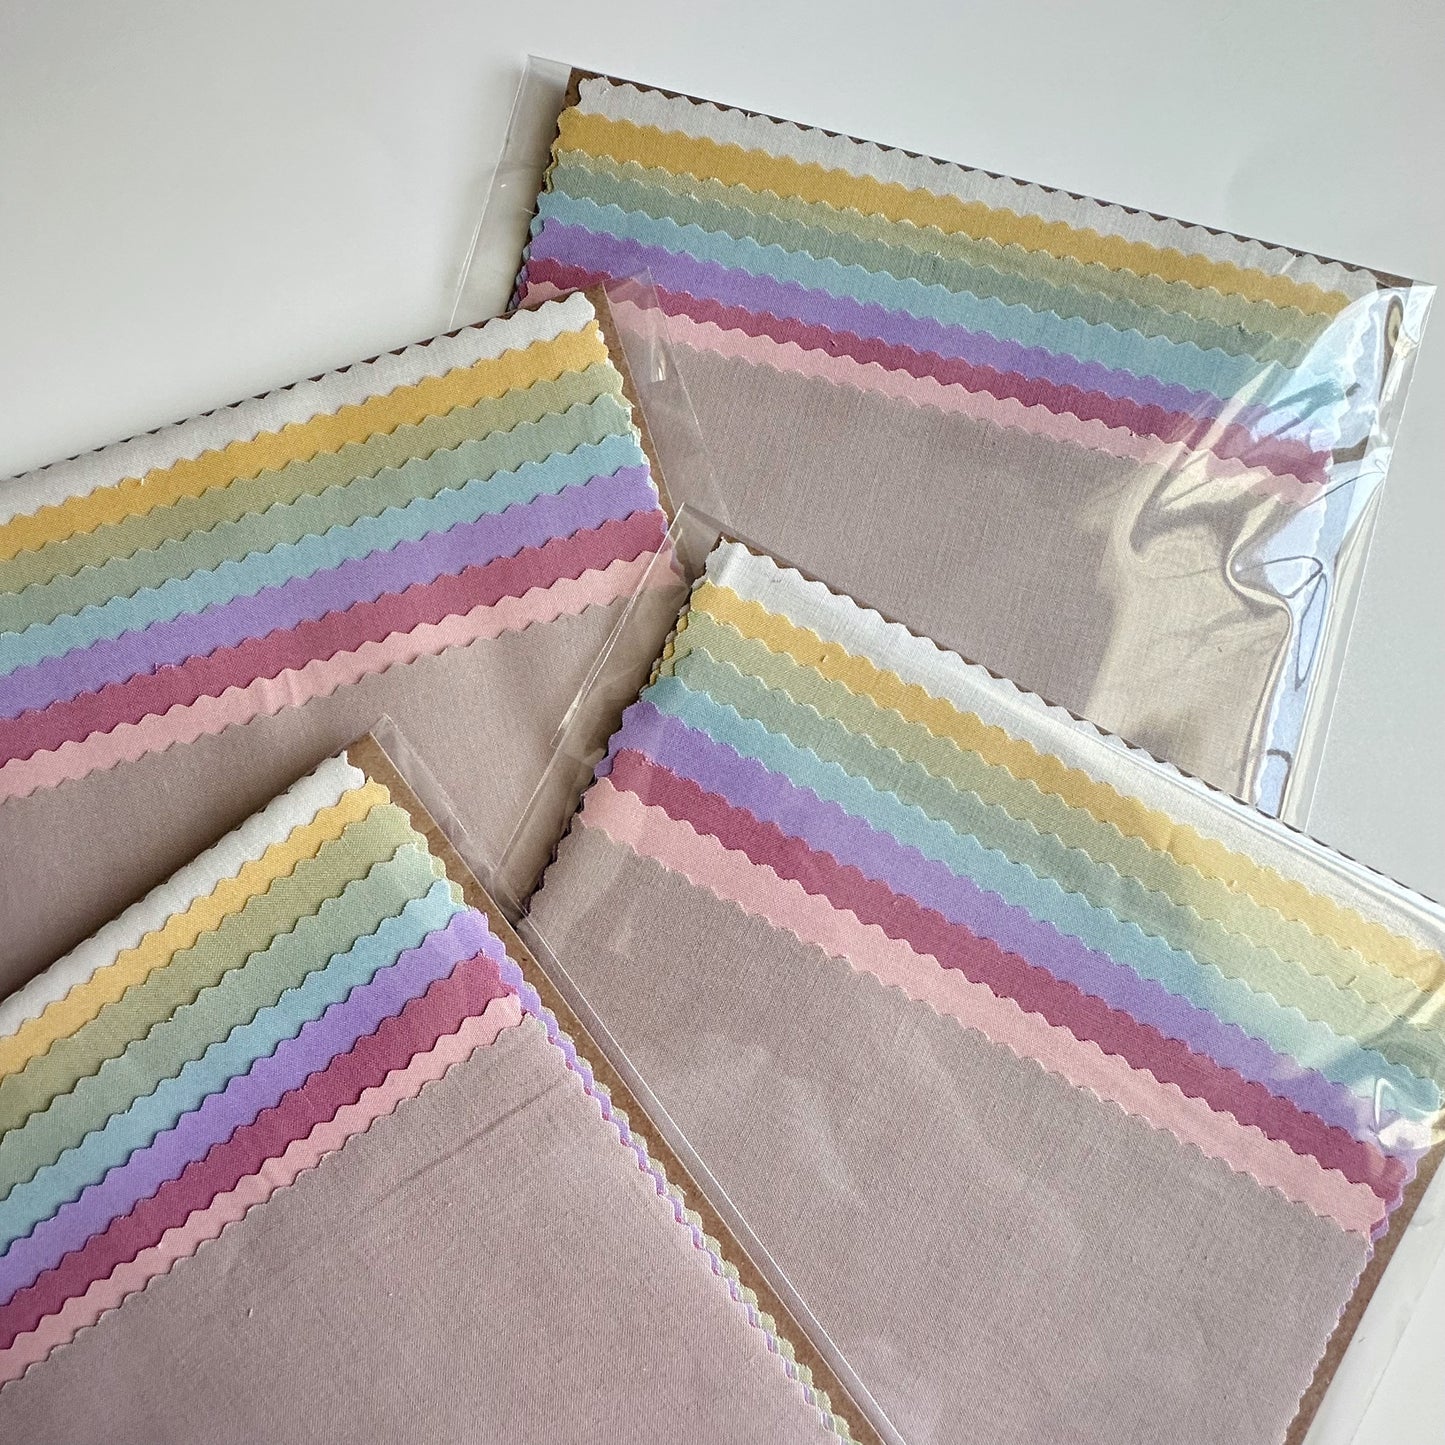 Embroidery Fabric Sample Pack - Kona Cotton Solids